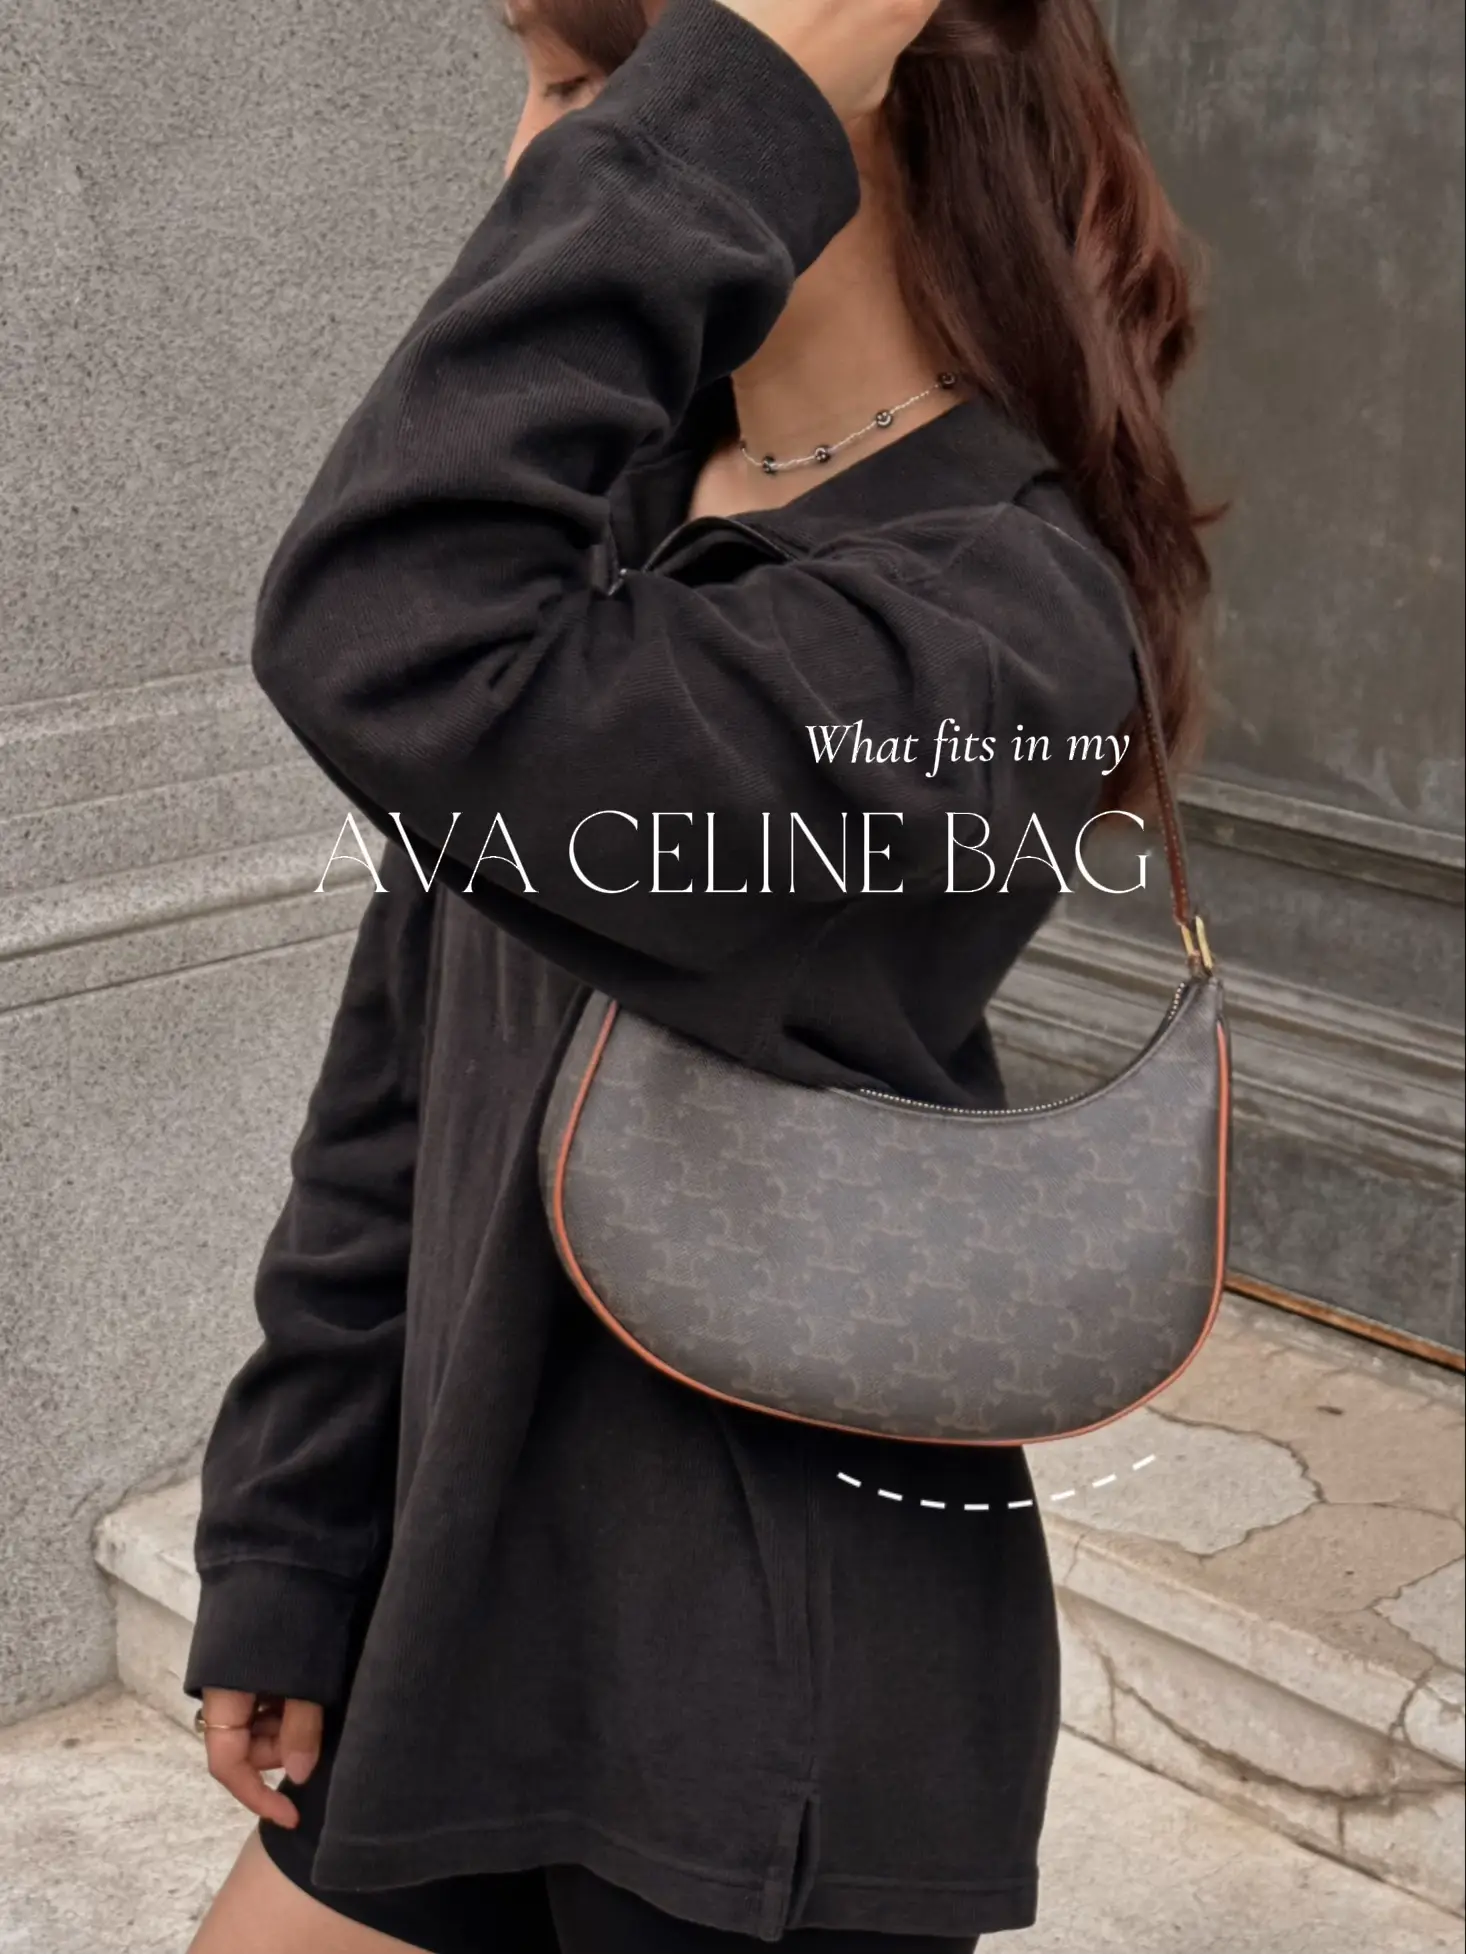 AVA CELINE BAG 🤎 Outfit & What fits?! ✨, Gallery posted by cyndi ᐧ༚̮ᐧ